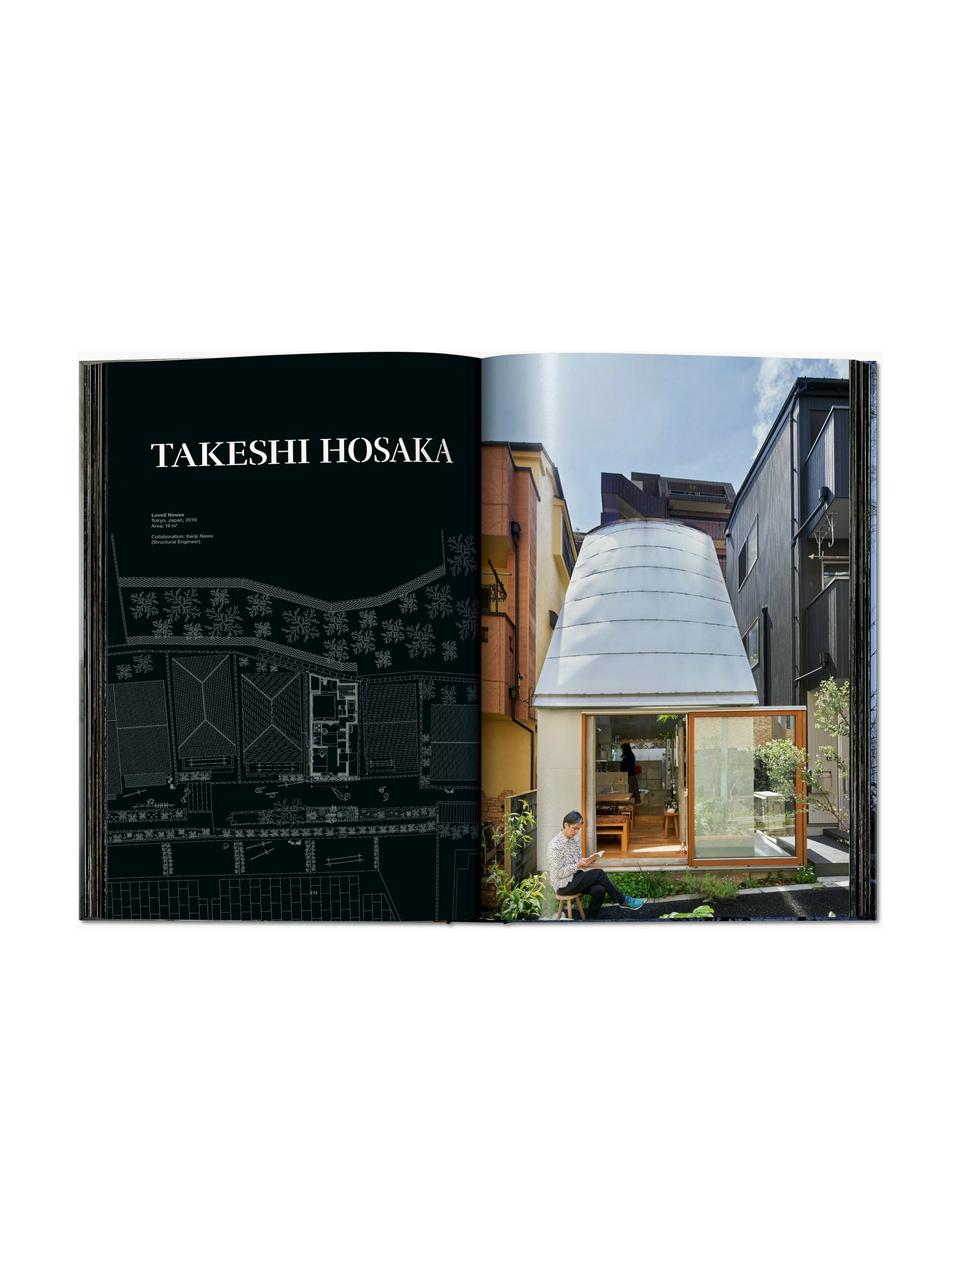 Libro ilustrado Homes for our Time - Small Houses, Papel, tapa dura, Small Houses, An 25 x Al 37 cm